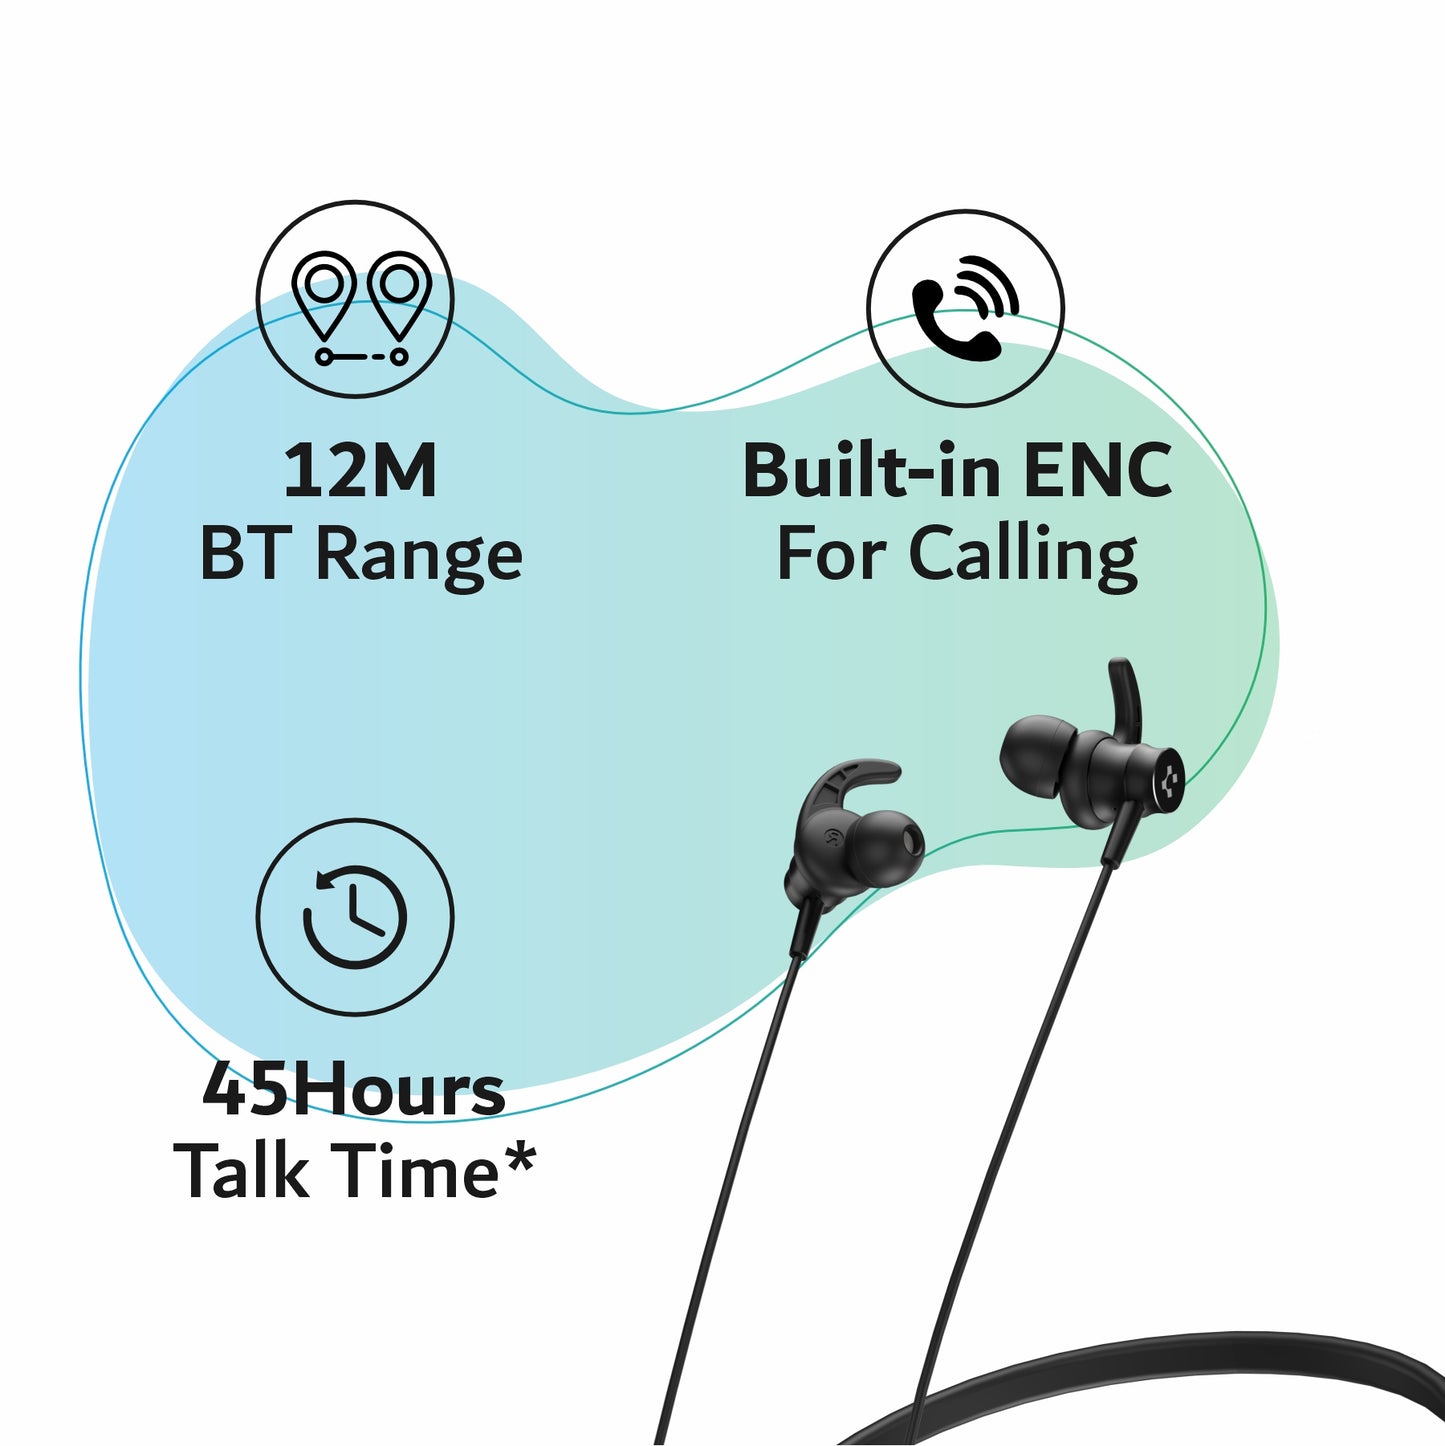 LYNE  Rover 9 Pro 40 Hours Music Time Bluetooth Neckband with Gaming Mode and Vibration Motor